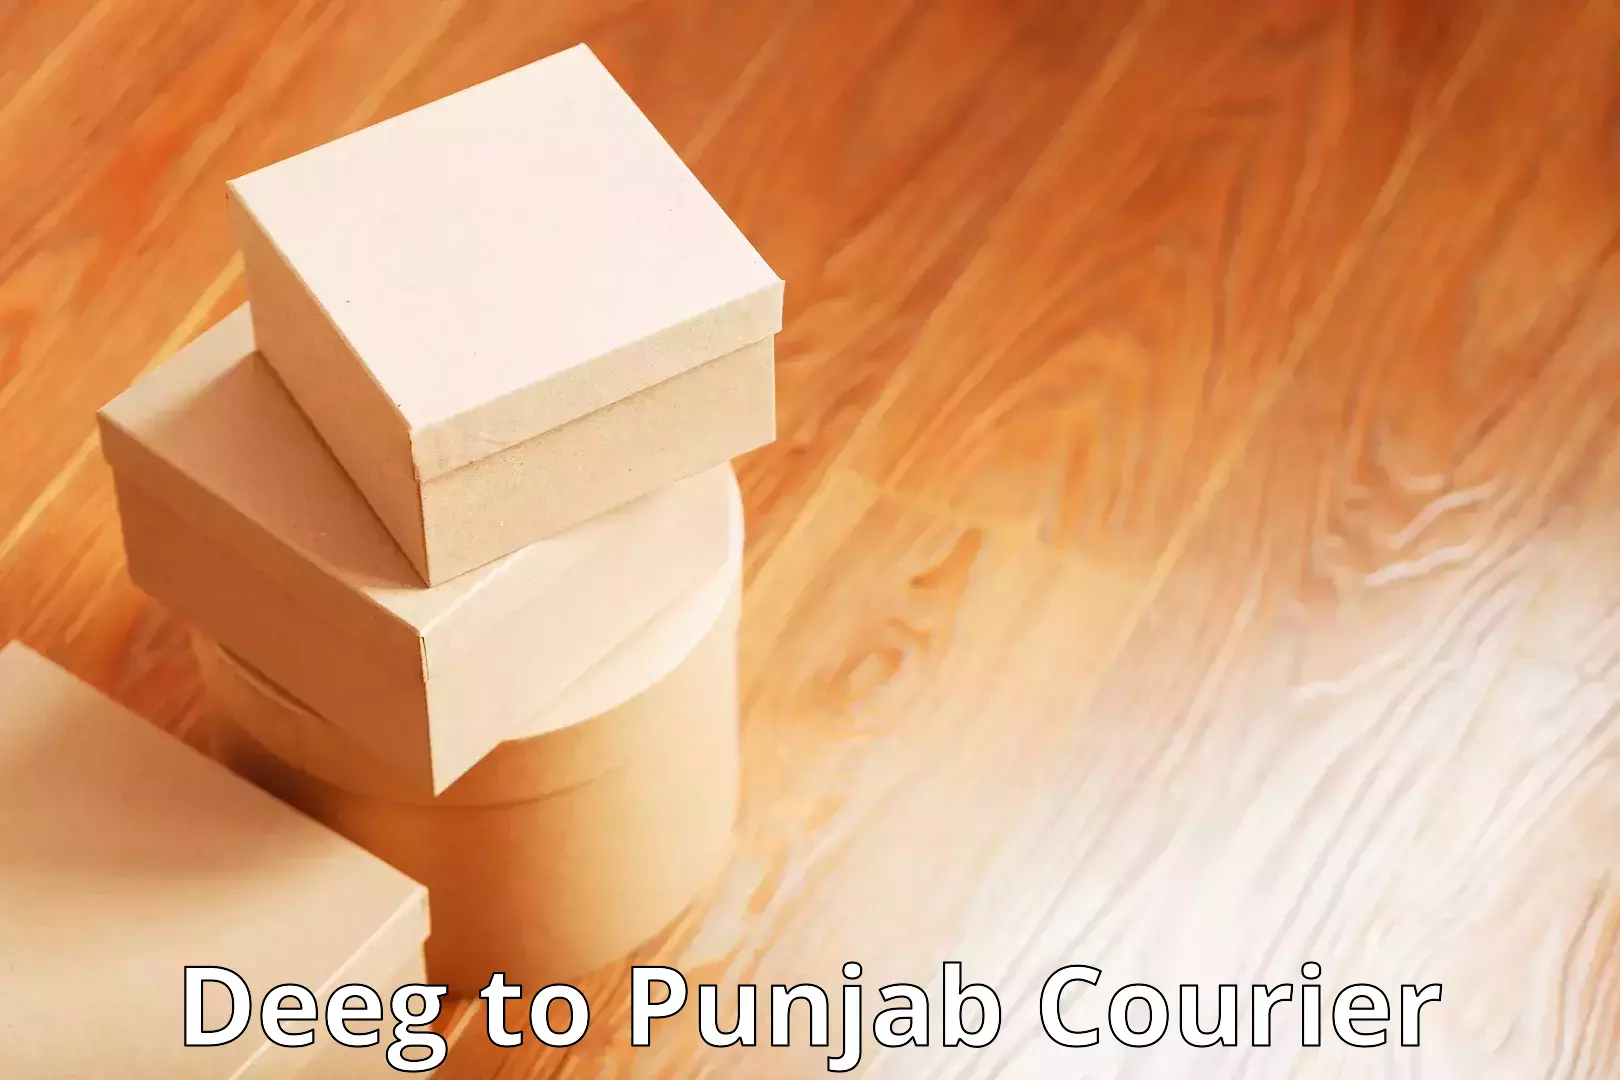 State-of-the-art courier technology Deeg to Punjab